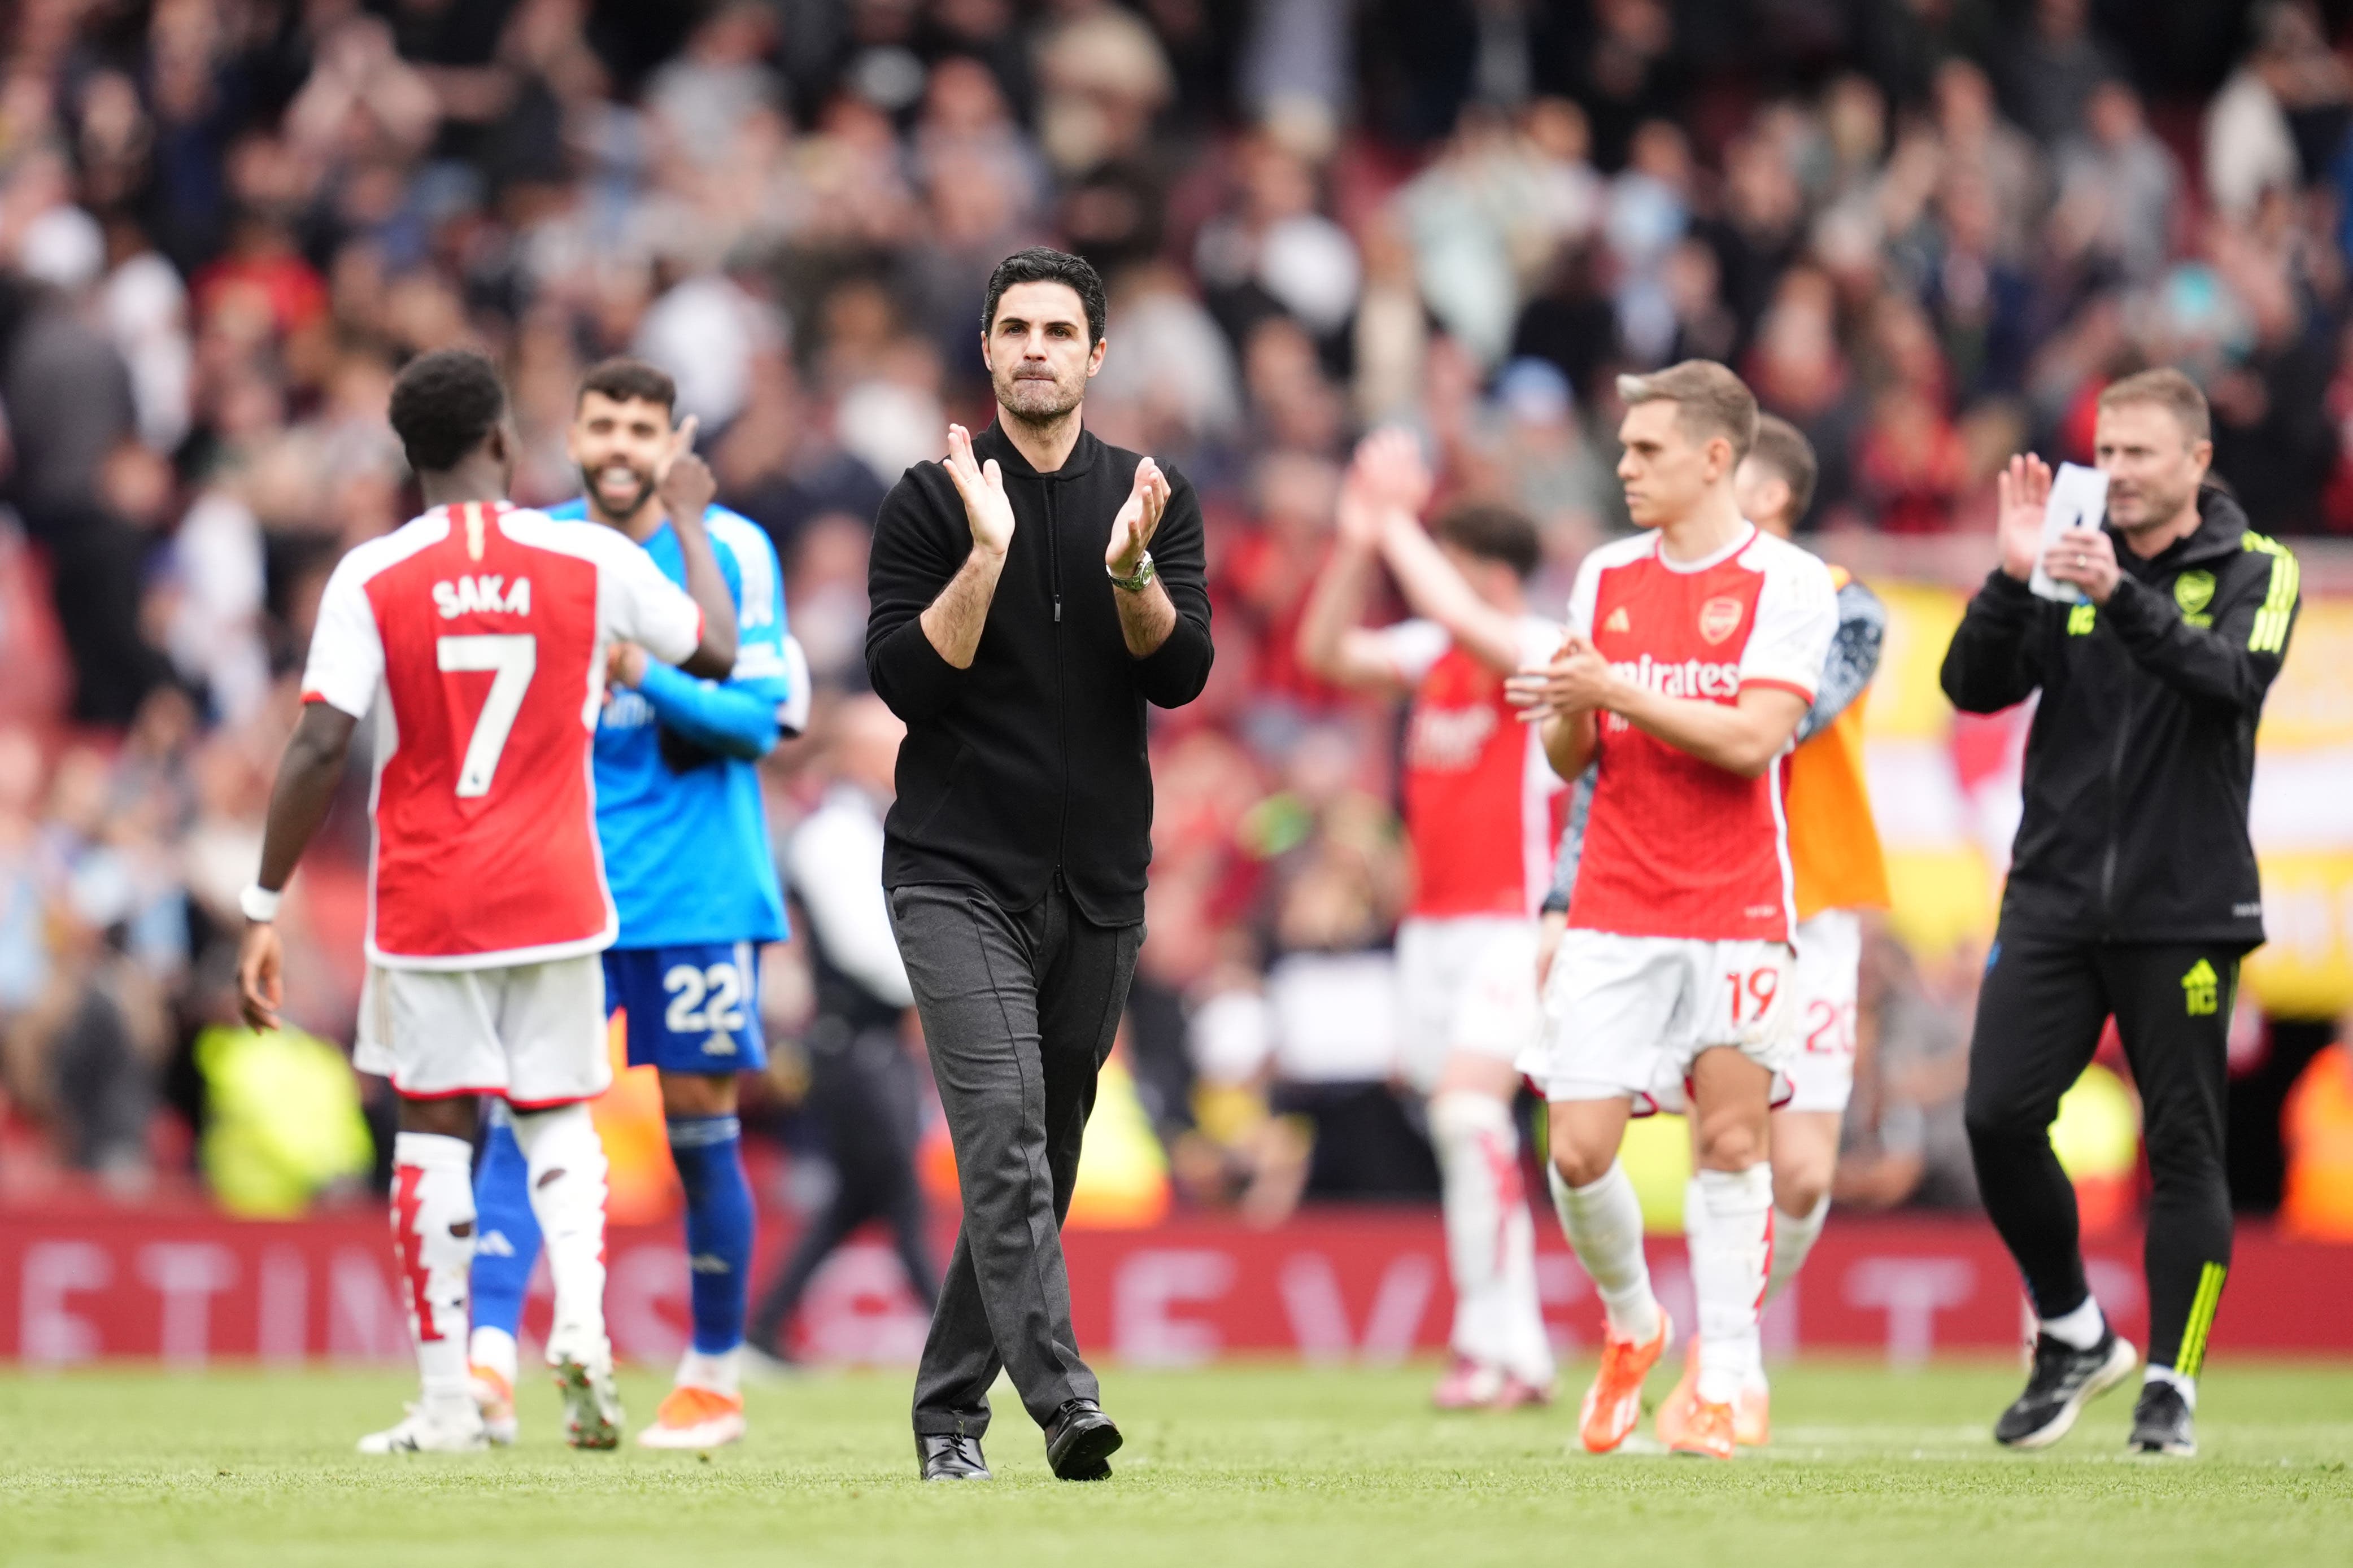 Mikel Arteta’s Arsenal are just two points behind City as the final league day approaches